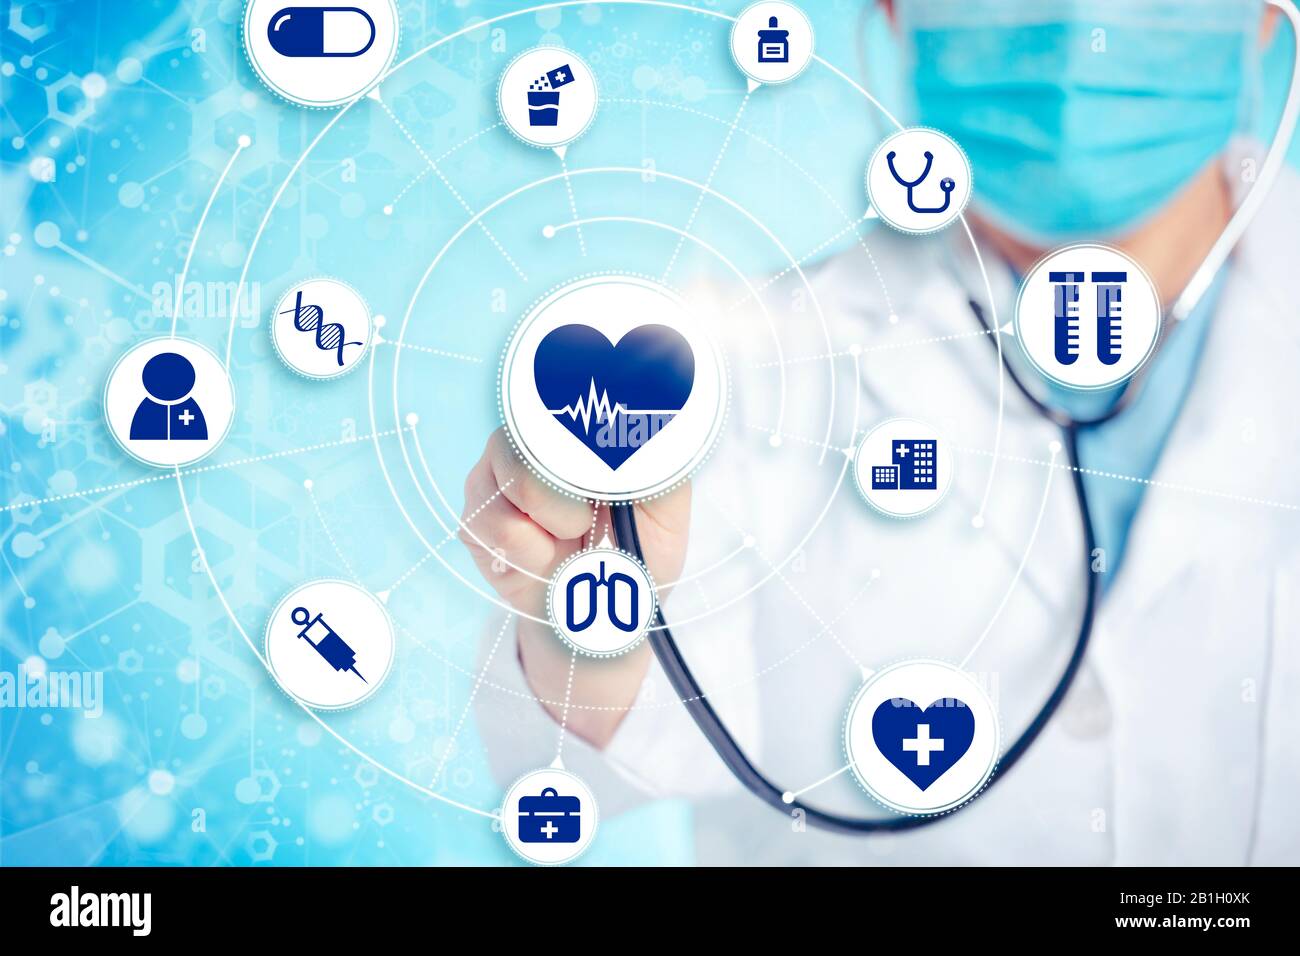 doctor with stethoscope in hand for medical exam concepts Stock Photo